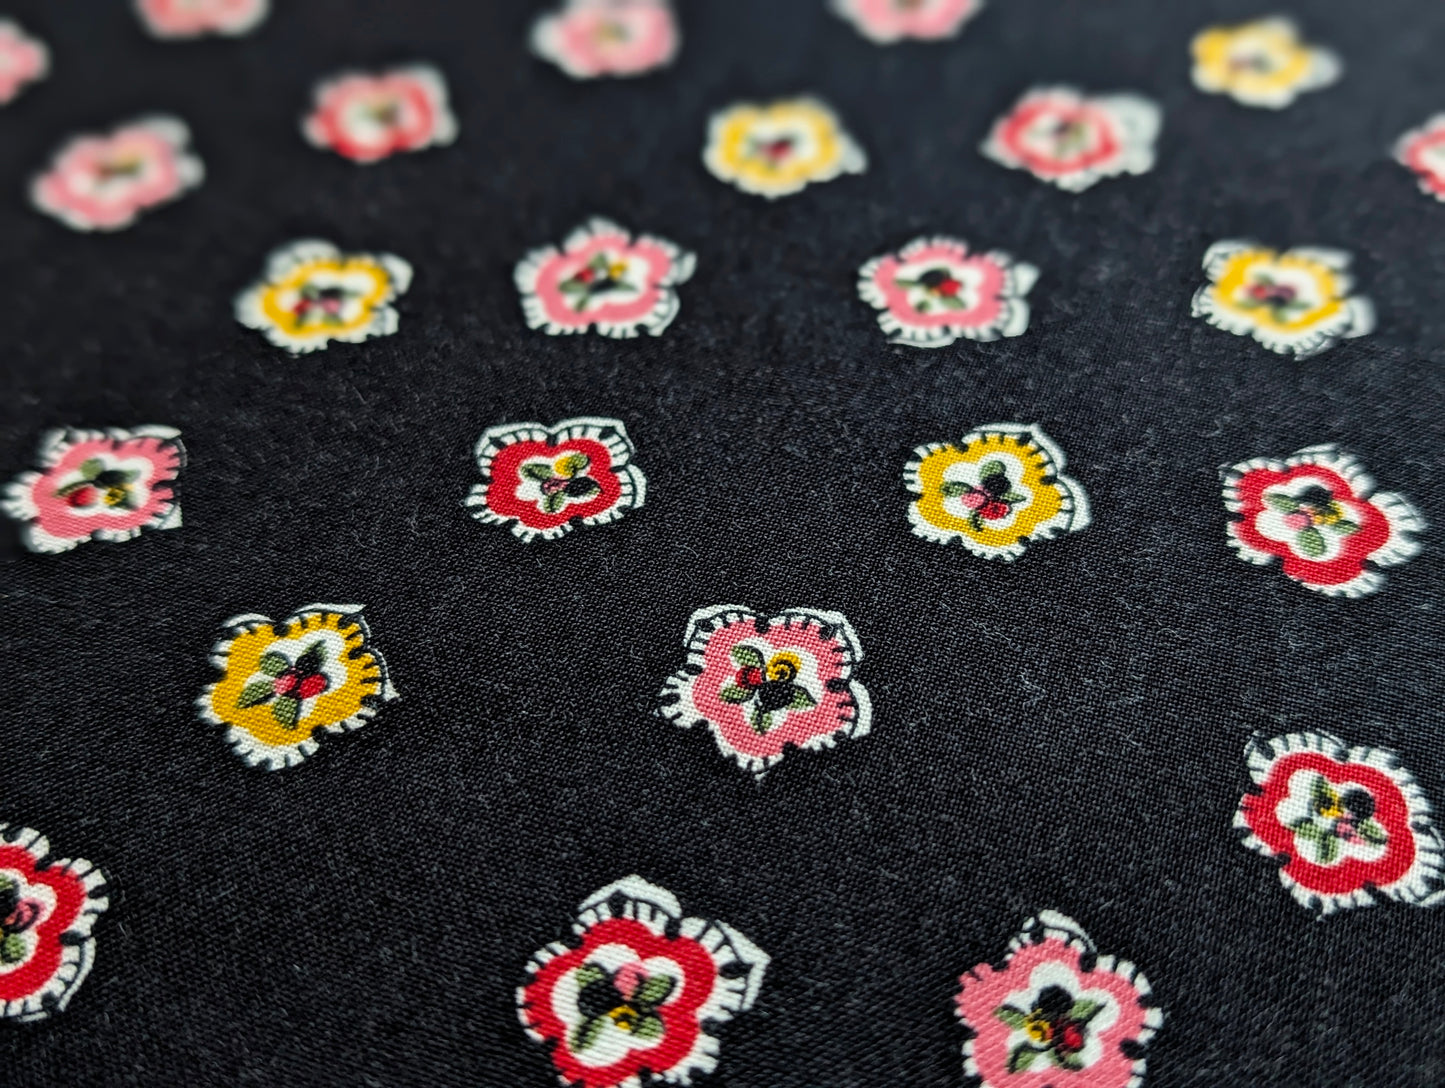 Vintage Fabric - MCM Flowers on Black Background Cotton by Hamil Textiles